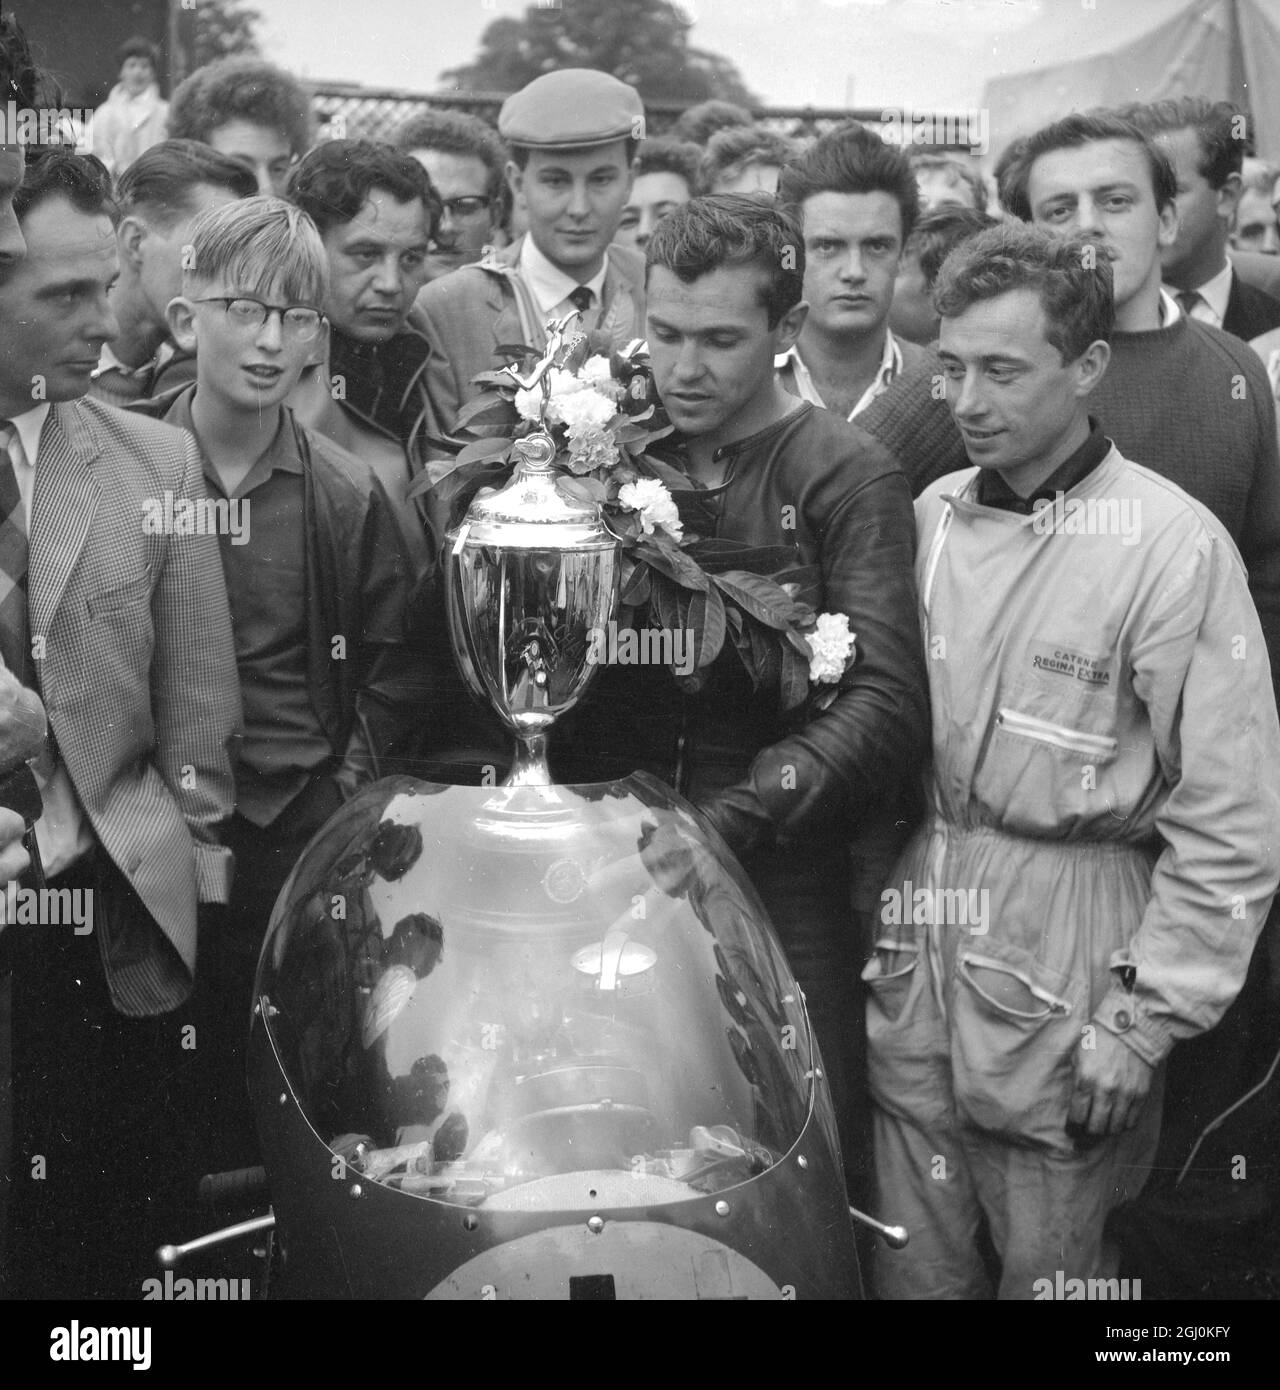 Mallory park, Leicester: Rhodesian Motor-cycling ace, Gary Hocking with the famous Italian MV Augusta Motorcycle, Laurels and cup with his Italian motor-cycle mechanic in the pits at Mallory Park (24th September) after he had won the race of the year at an average speed of 87.72 M.P.H.. The senior champion won the £1,000 first prize beating Britain's Mike Hailwood (499 Norton) into second place. 25 September1961 Stock Photo